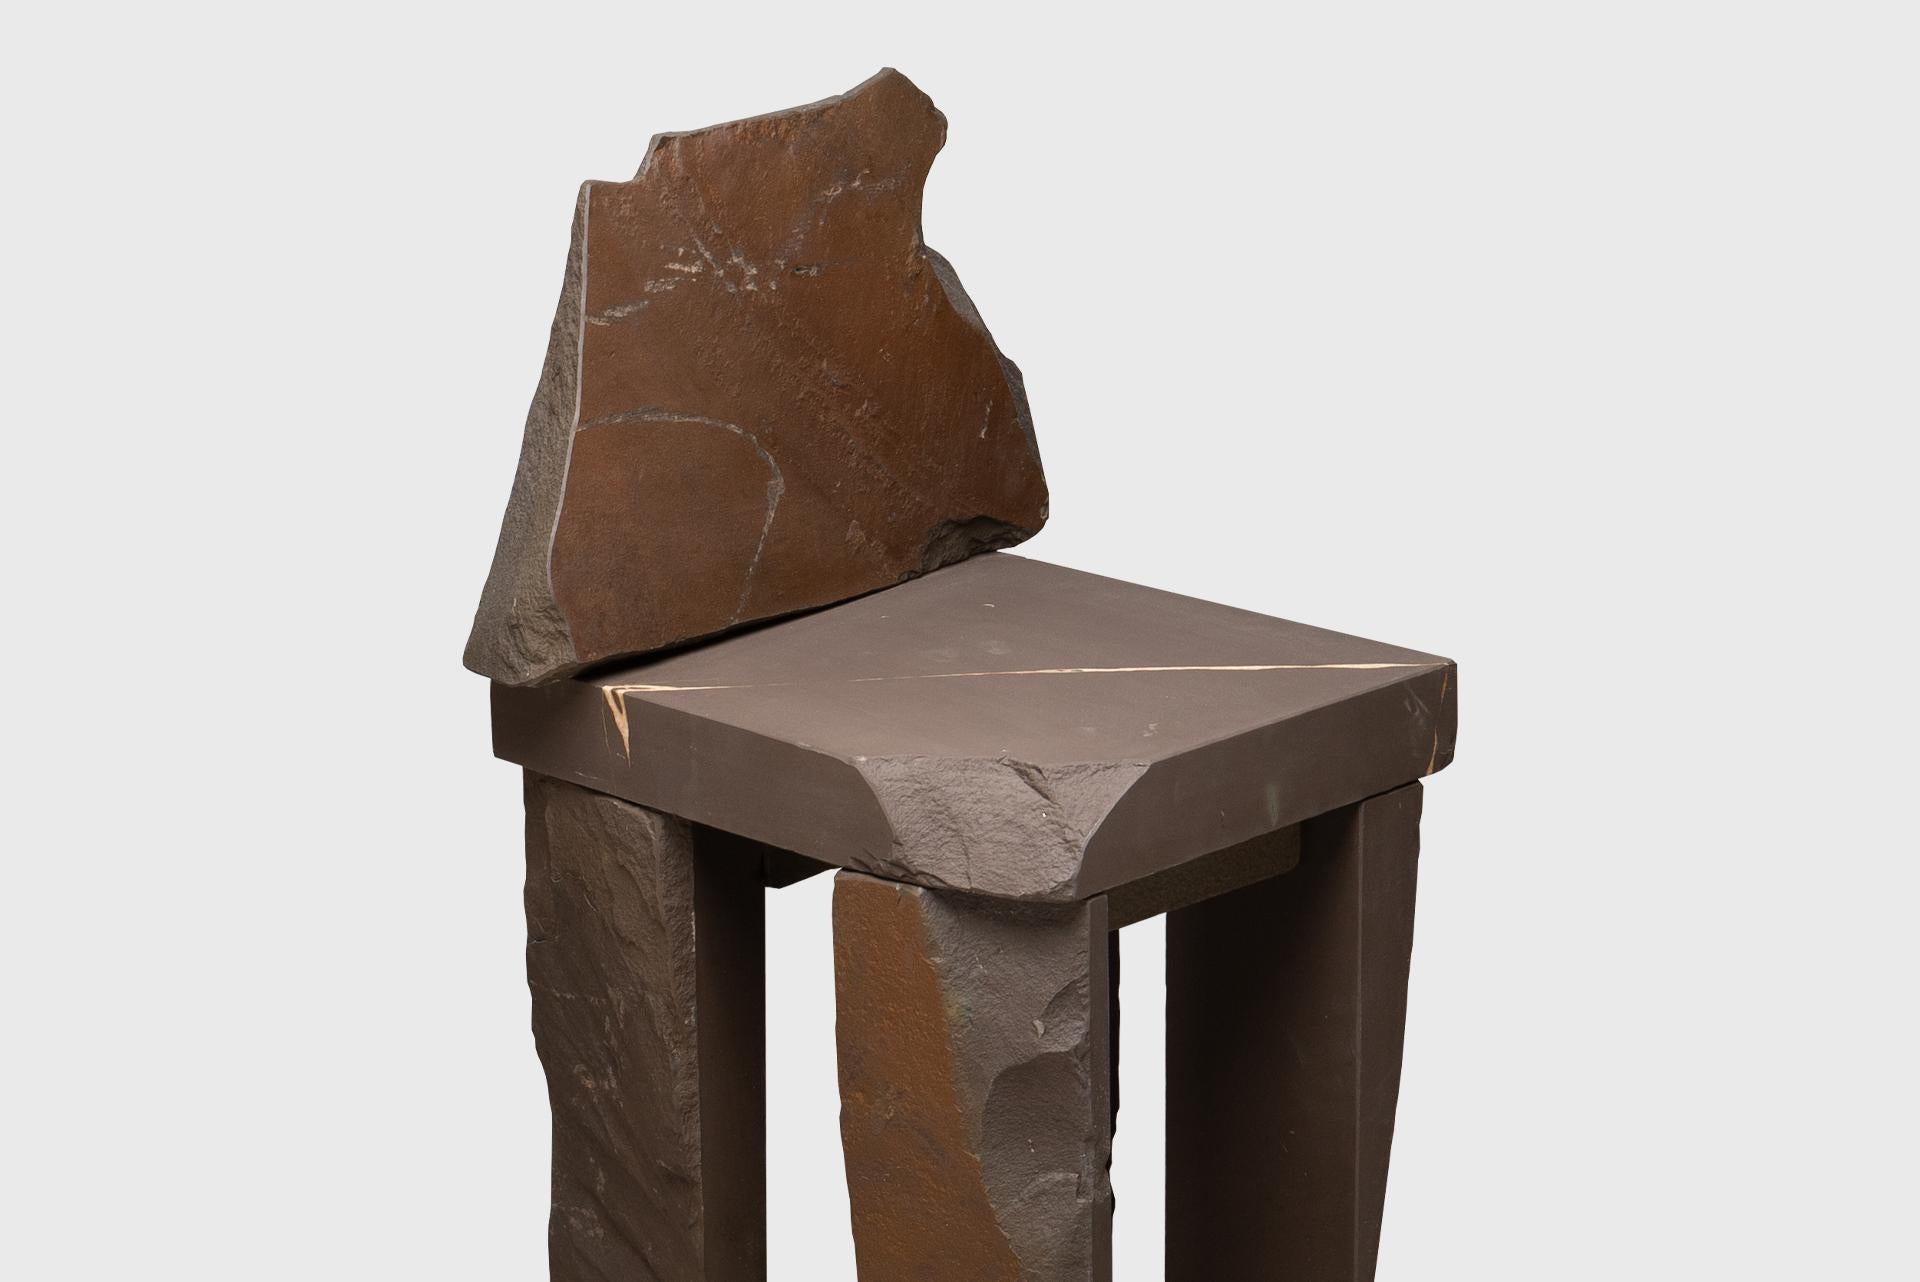 Contemporary Natural Chair 09, Graywacke Offcut Gray Stone, Carsten in der Elst For Sale 4